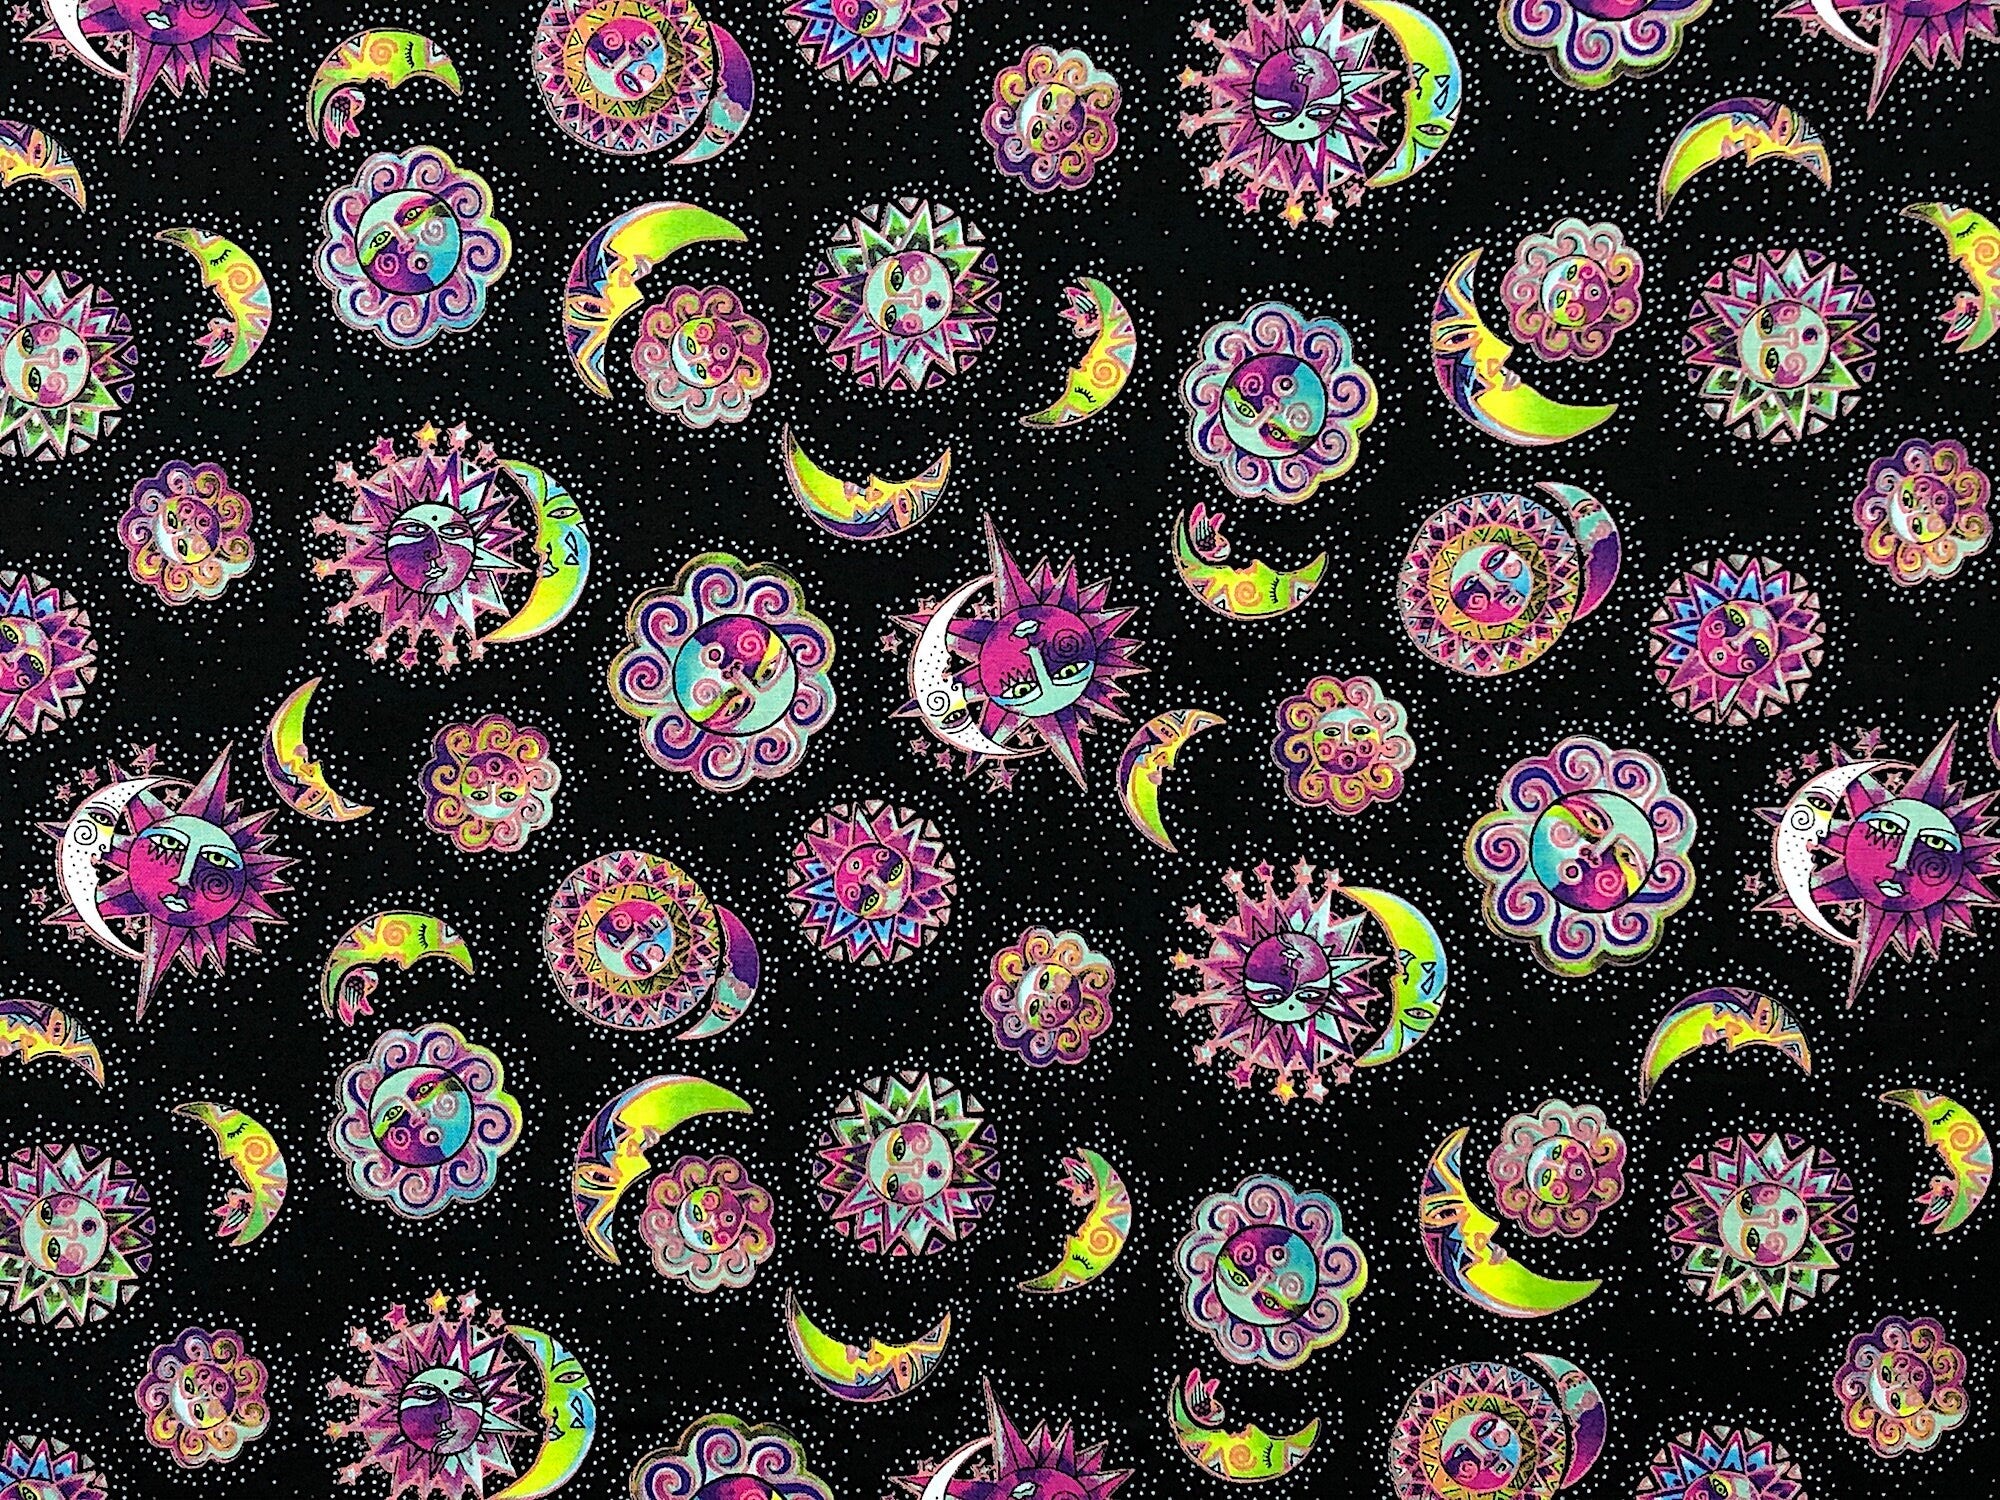 This black fabric is covered with suns and moons.